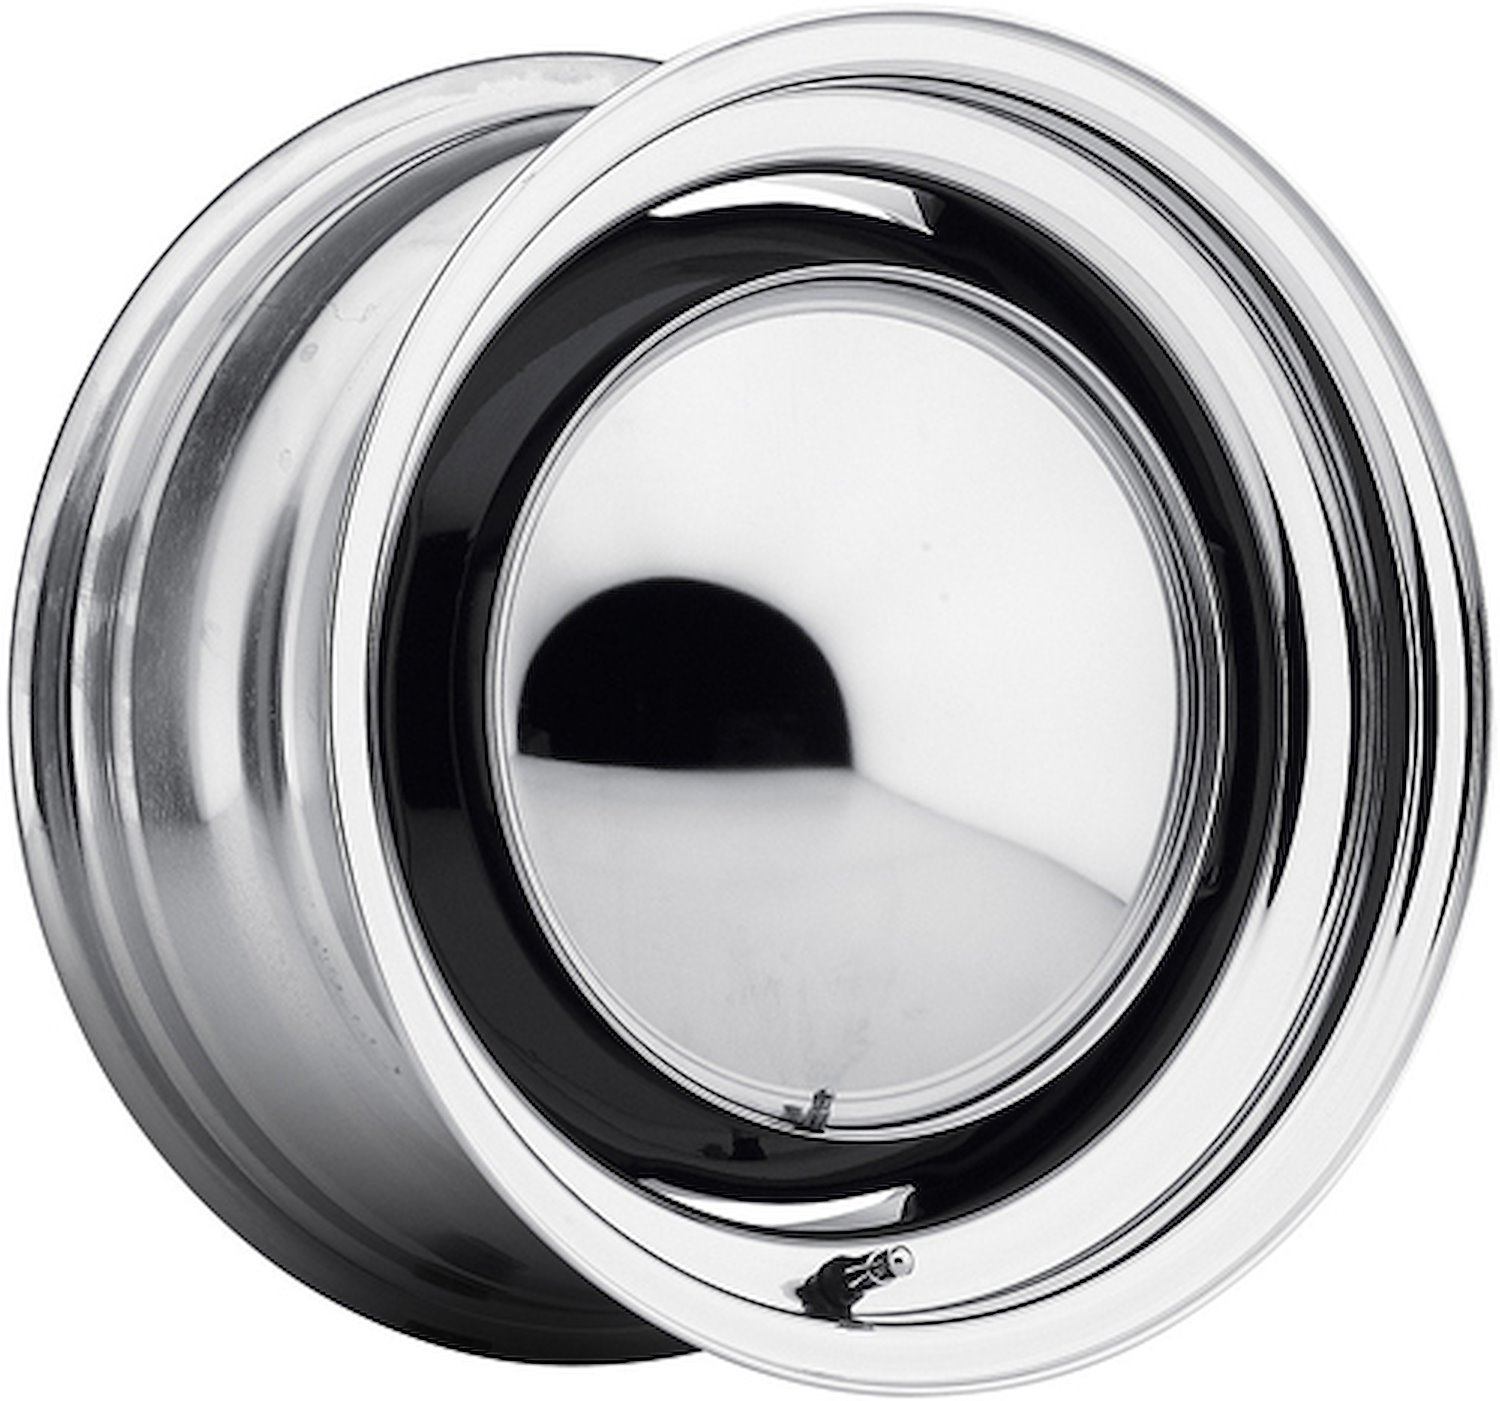 CHROME RIM & PAINT READY CENTER OEM 15 x 5 5 x 45 Bolt Circle 3 Back Spacing 0 offset 319 Center Bore 1400 lbs Load Rating